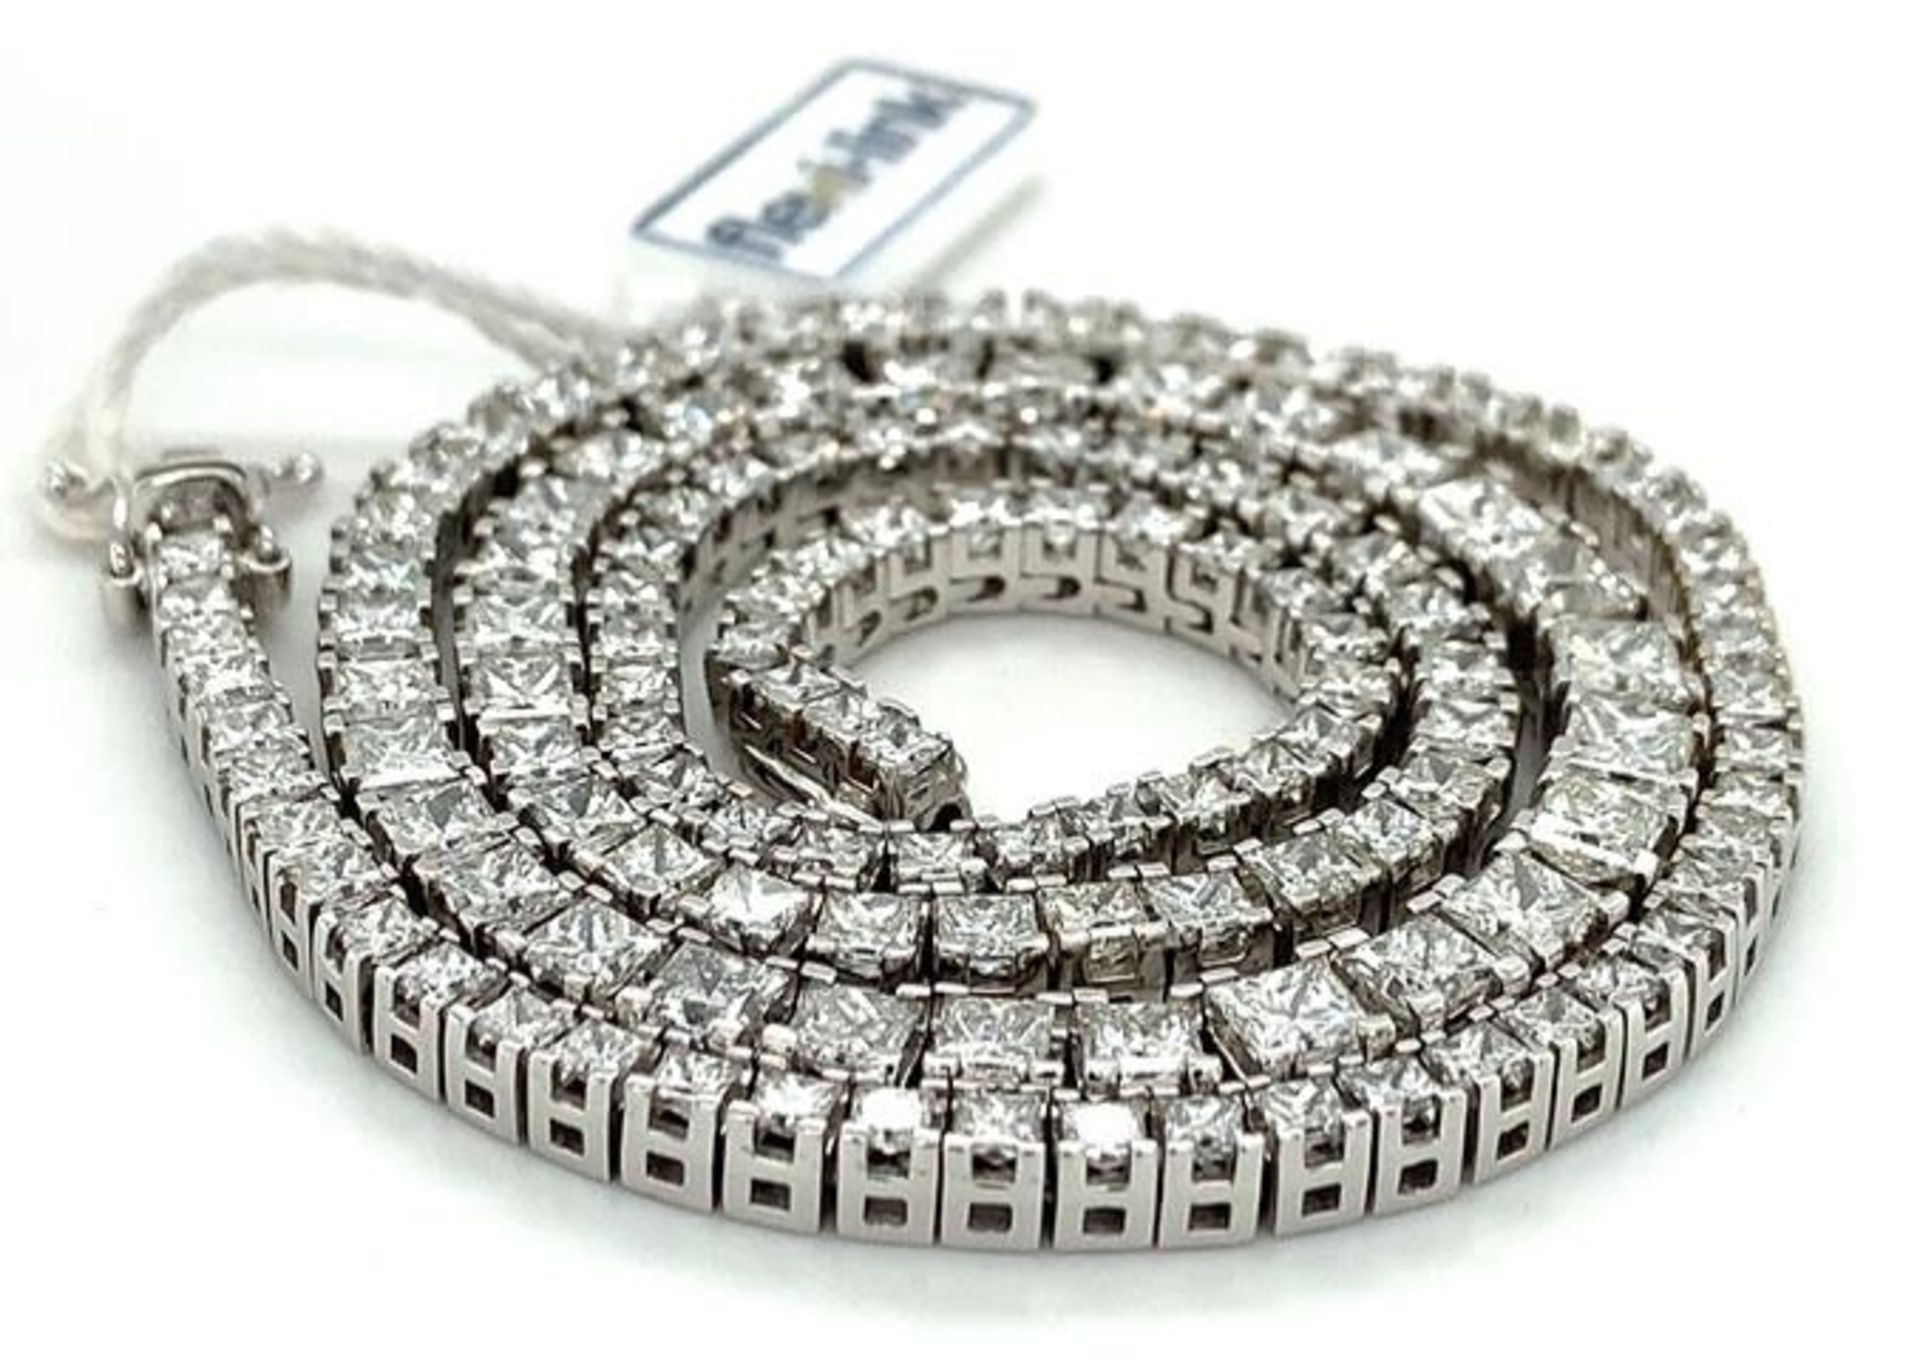 A spectacular 15.72ct princess cut diamond necklace in 18k white gold, 44cm length, brand new